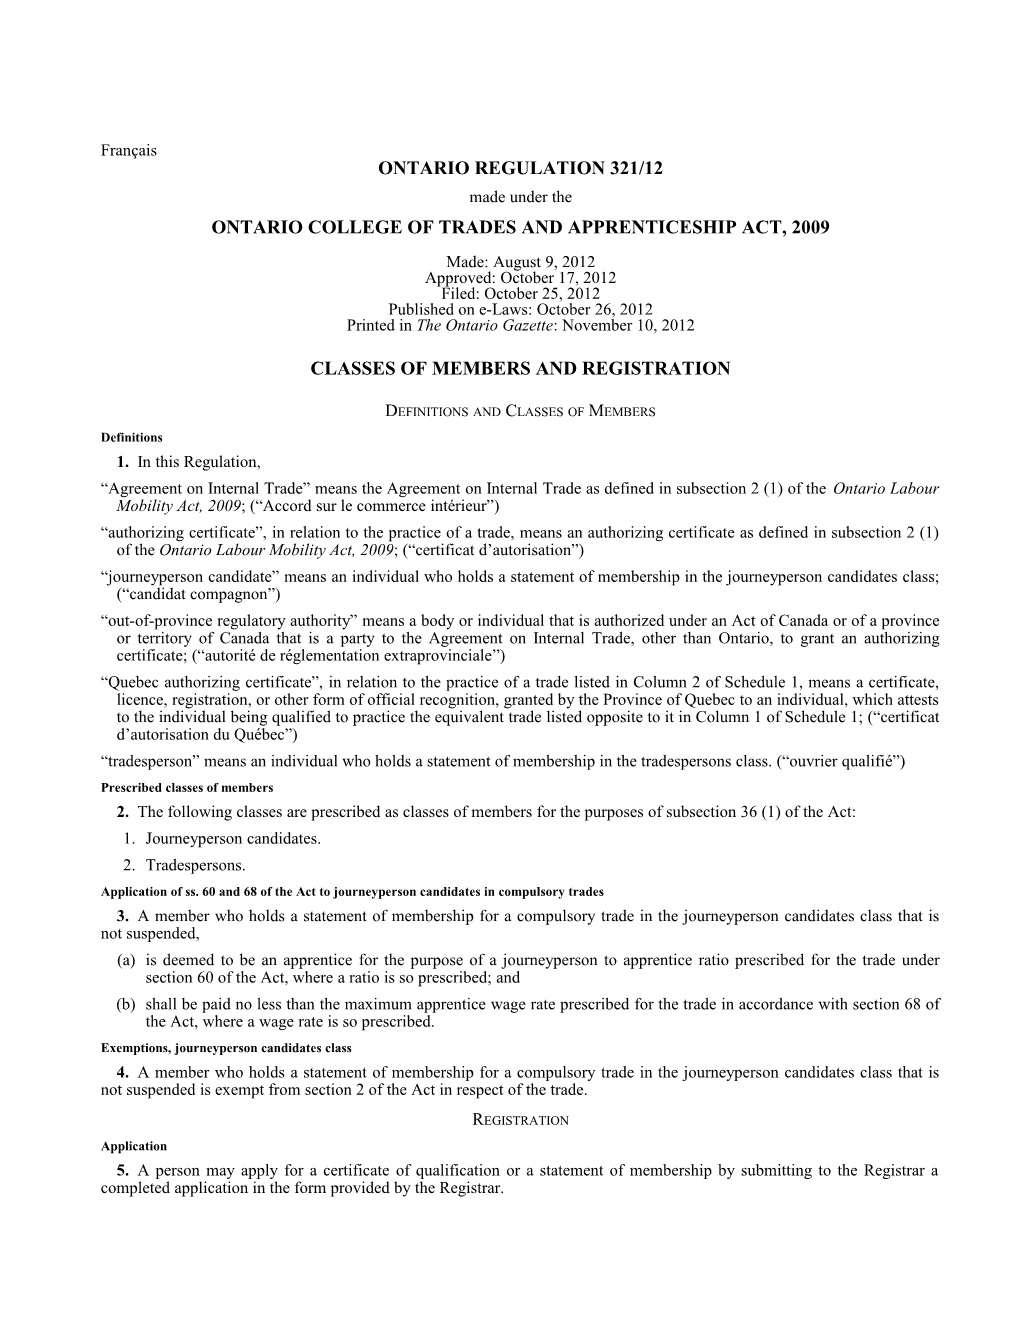 ONTARIO COLLEGE of TRADES and APPRENTICESHIP ACT, 2009 - O. Reg. 321/12